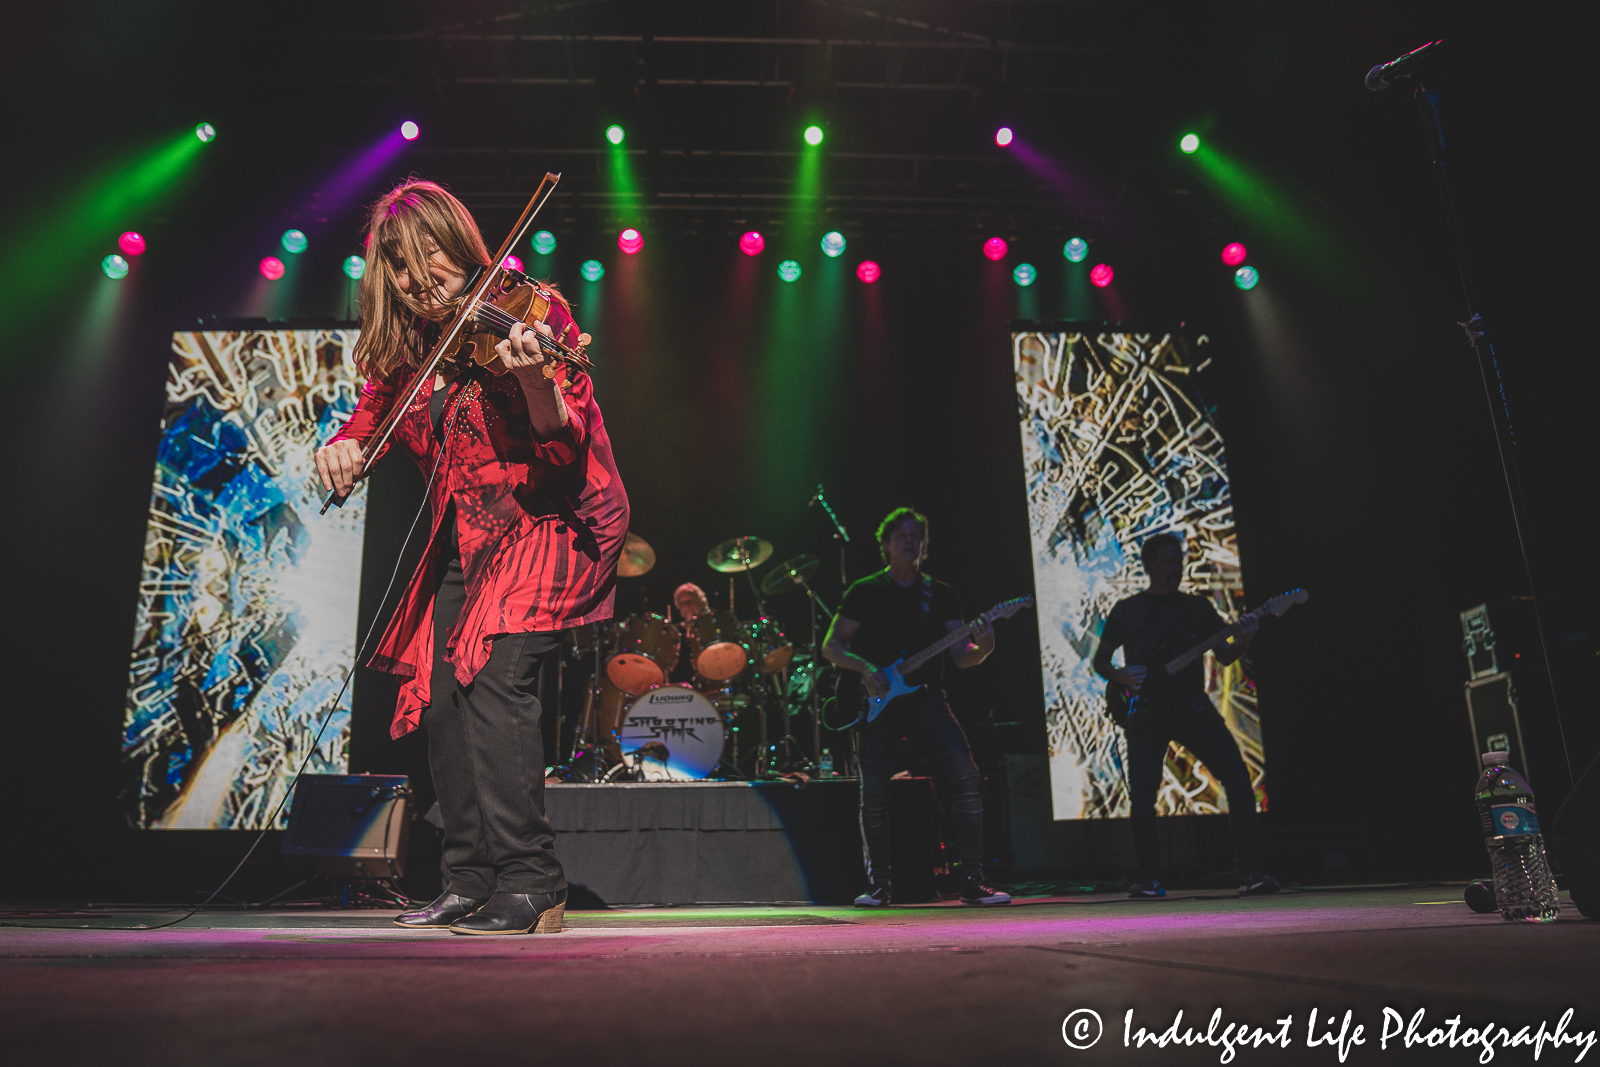 Shooting Star violinist Janet Jameson performing live at Star Pavilion inside of Ameristar Casino in Kansas City, MO on April 9, 2022.